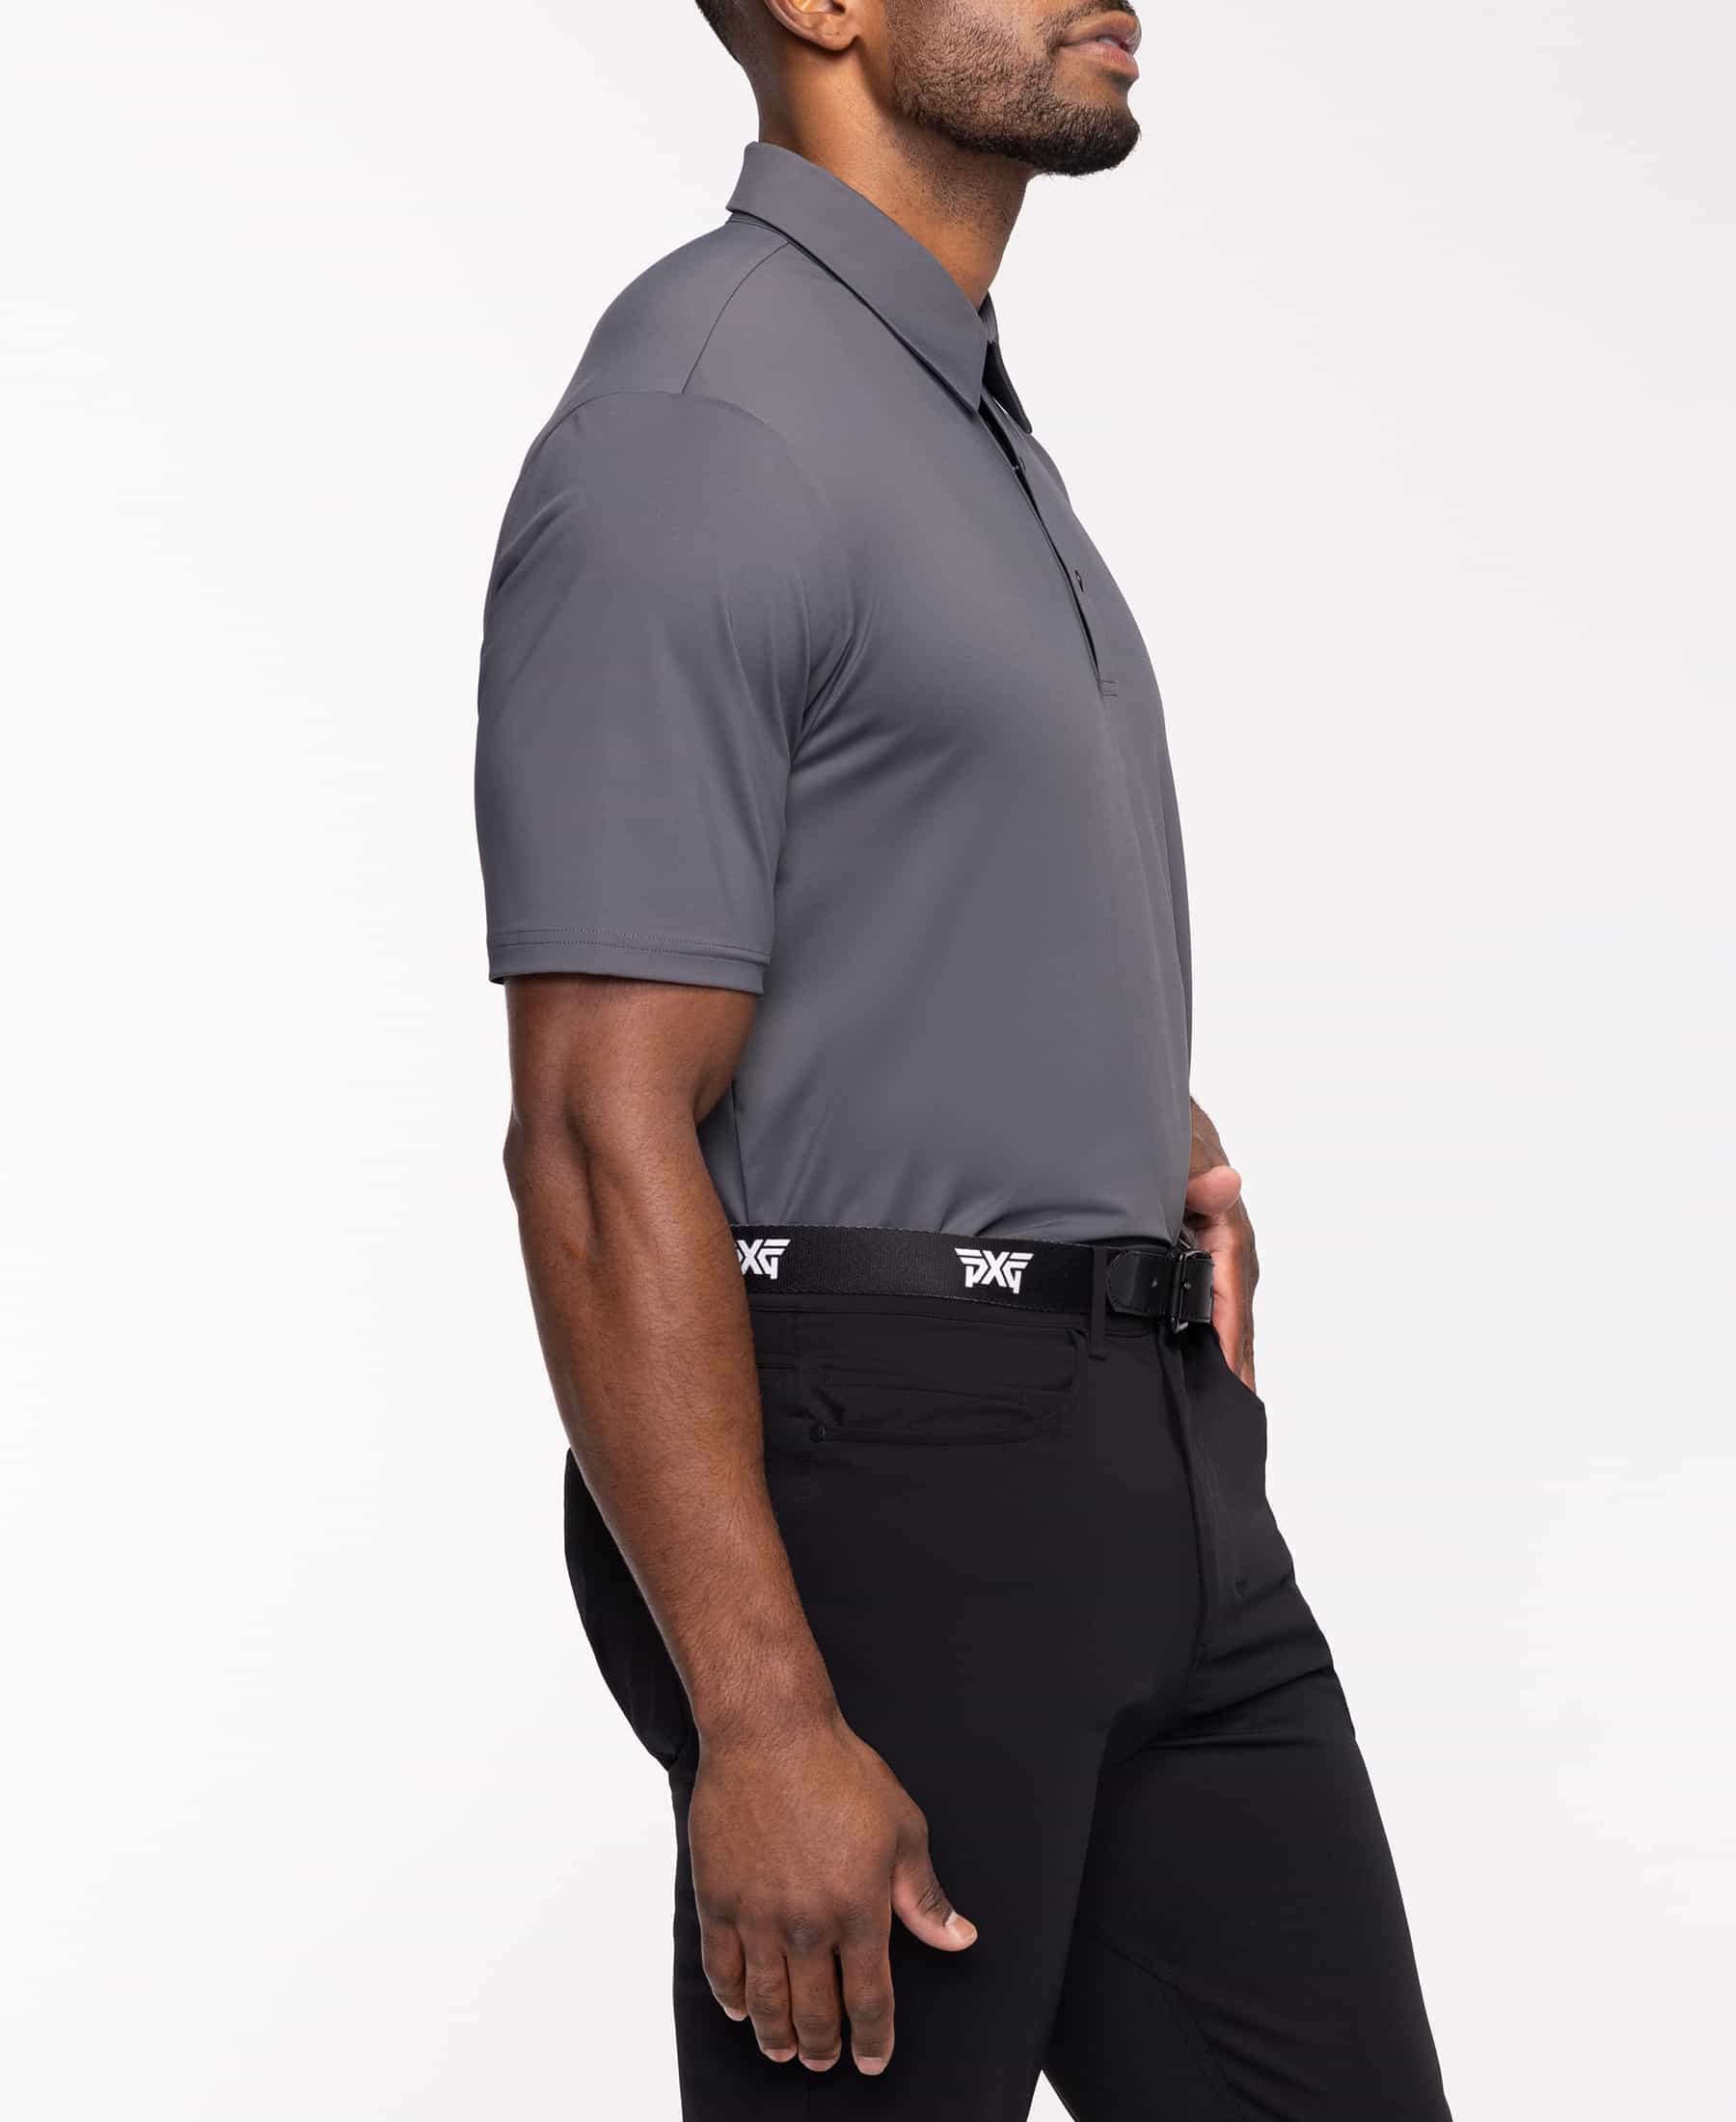 Comfort Fit Rally Perforated Polo  Shop the Highest Quality Golf Apparel,  Gear, Accessories and Golf Clubs at PXG